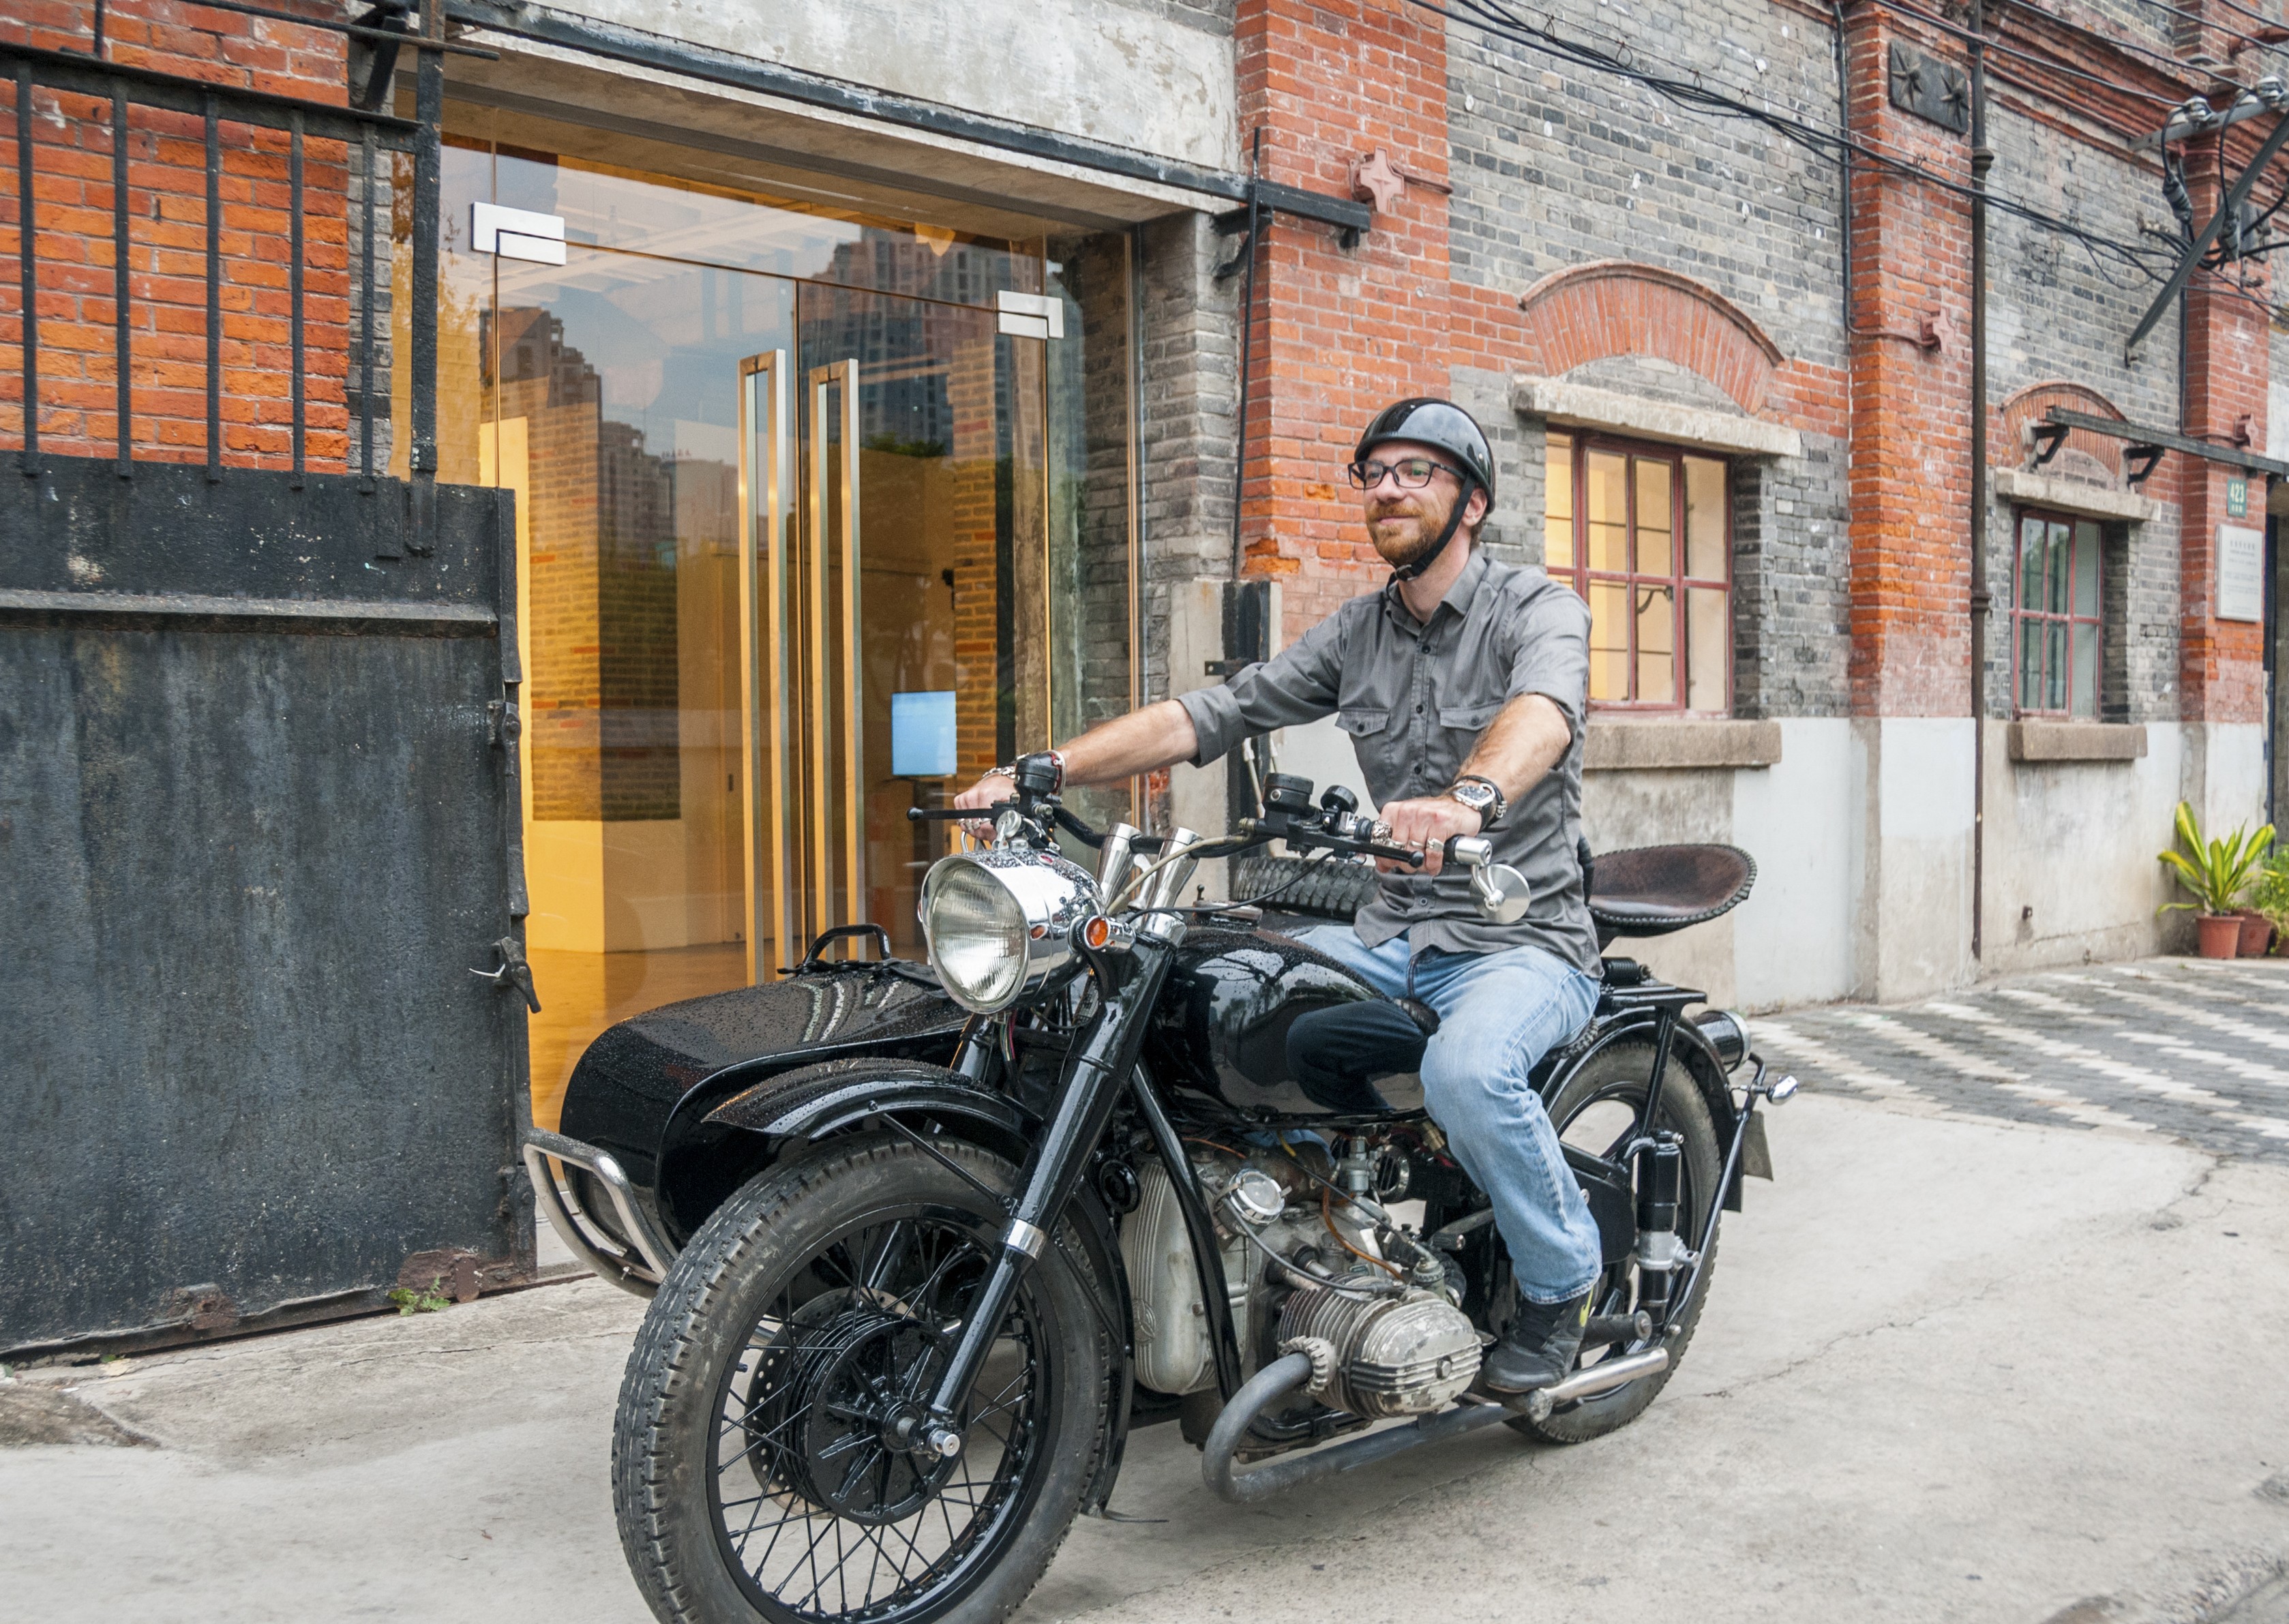 Shanghai Insiders guide Arthur Humeau on his Chang Jiang 750 motorcycle. Photo: Mark Andrews